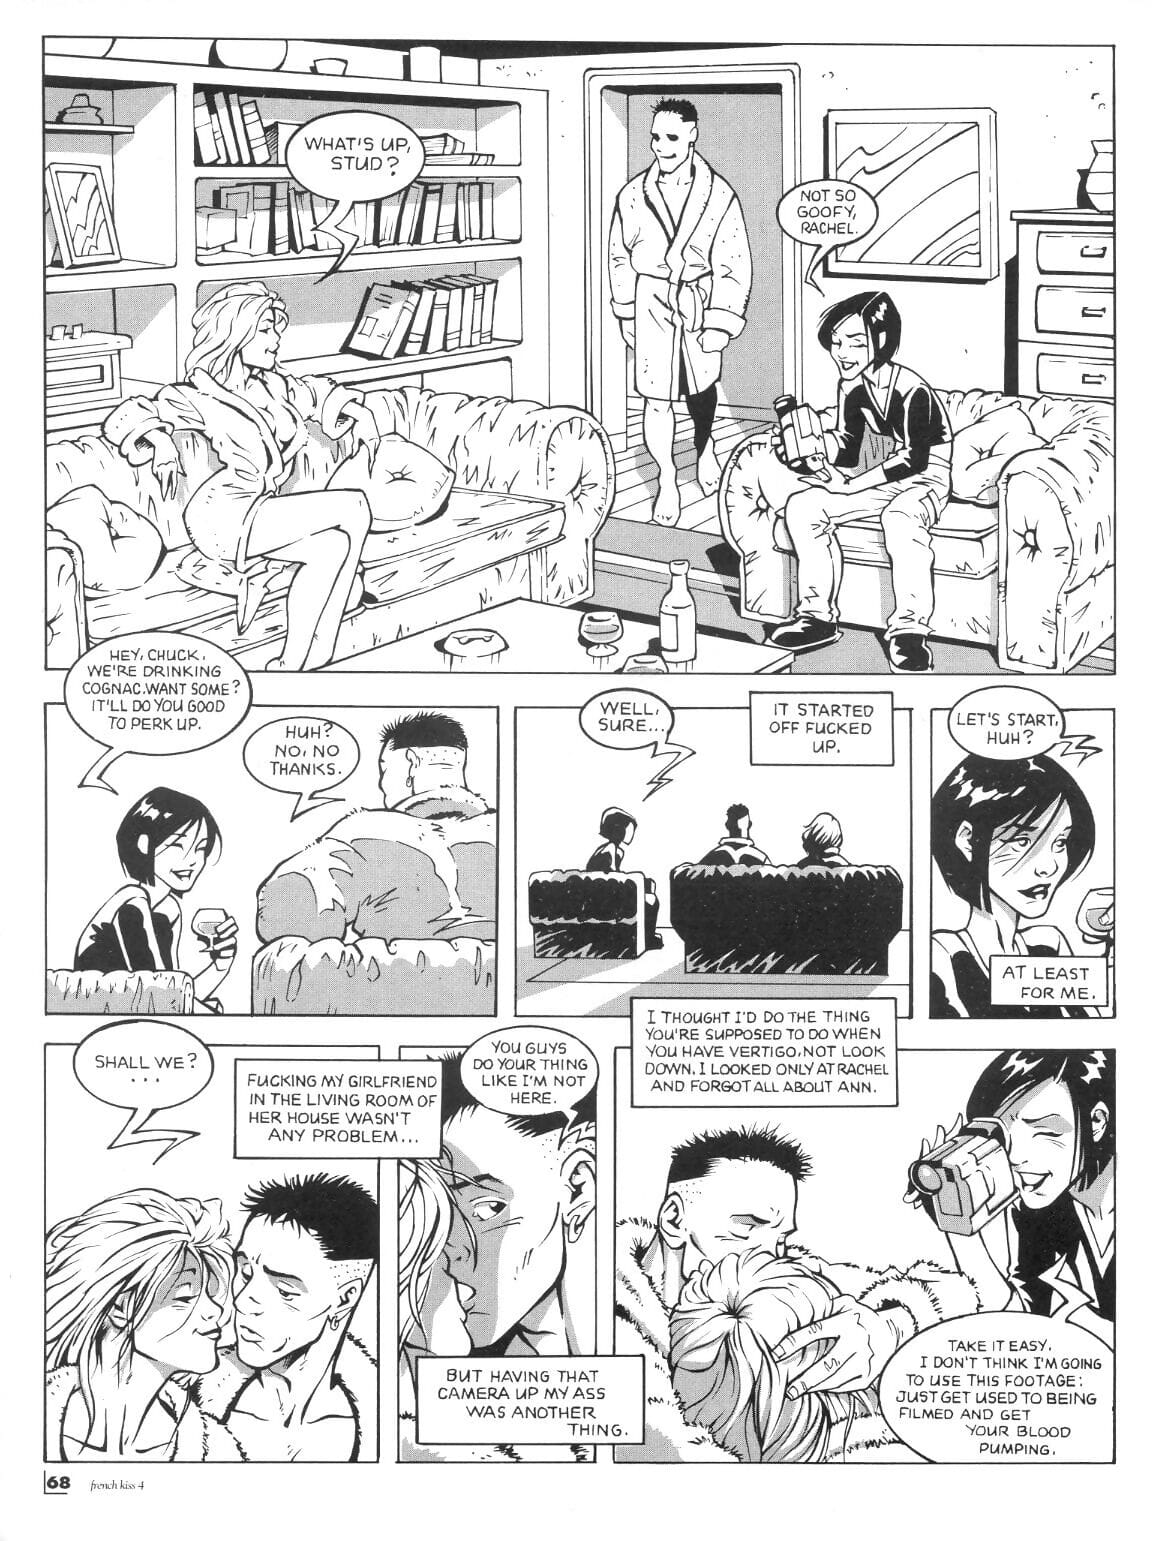 French Kiss 4 - part 2 page 1